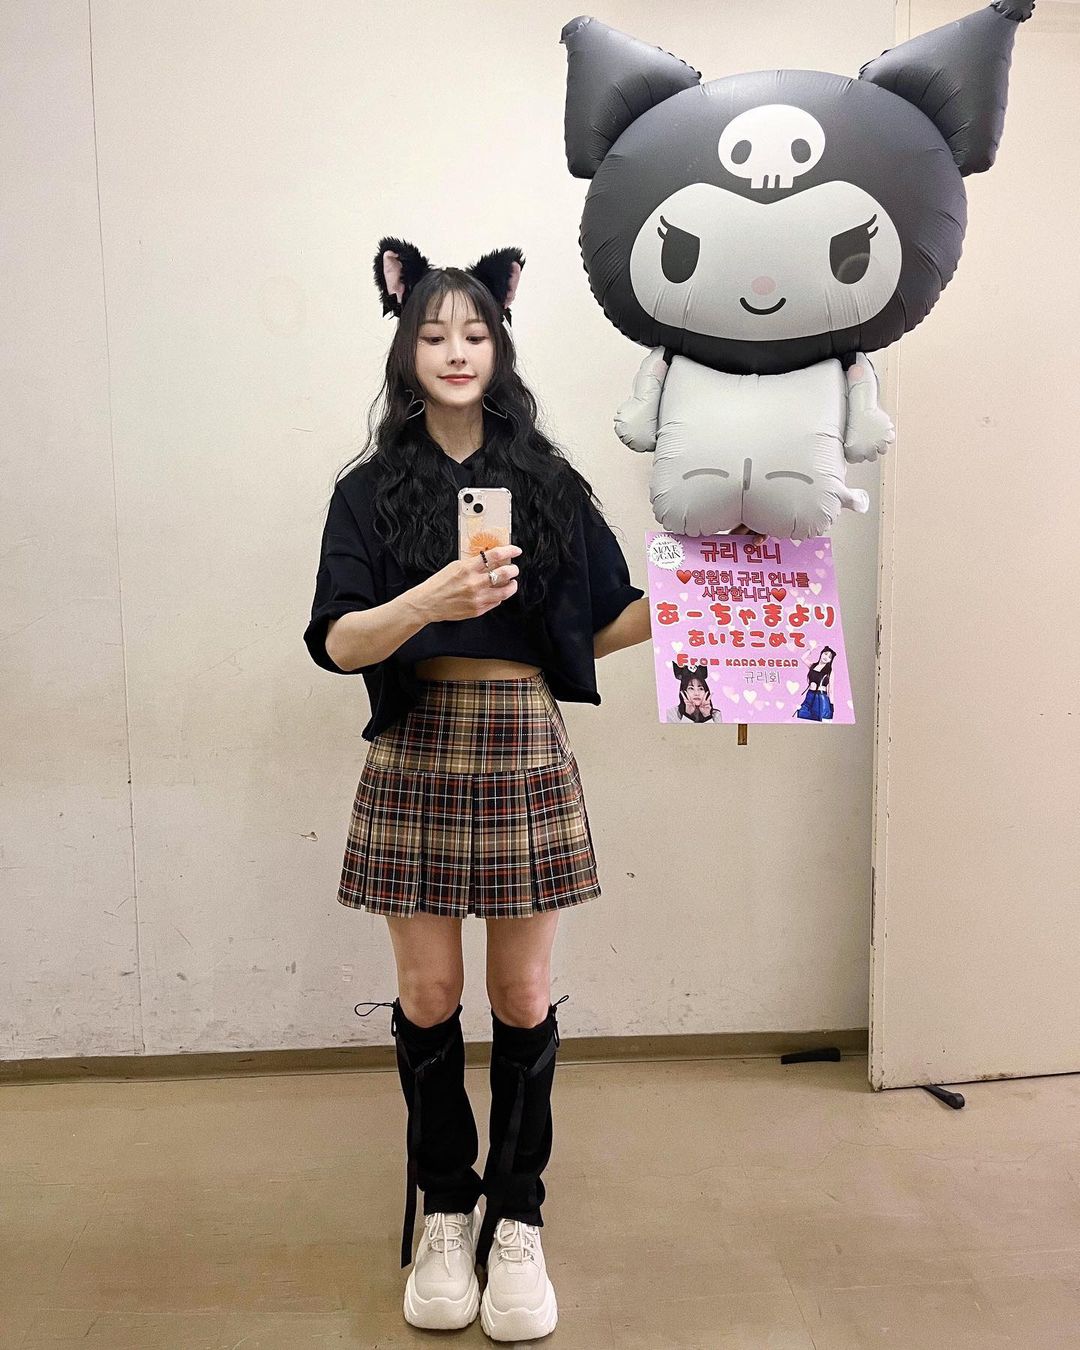 Gyuri, "Meow" lively status.. Transformed into a cat full of cuteness